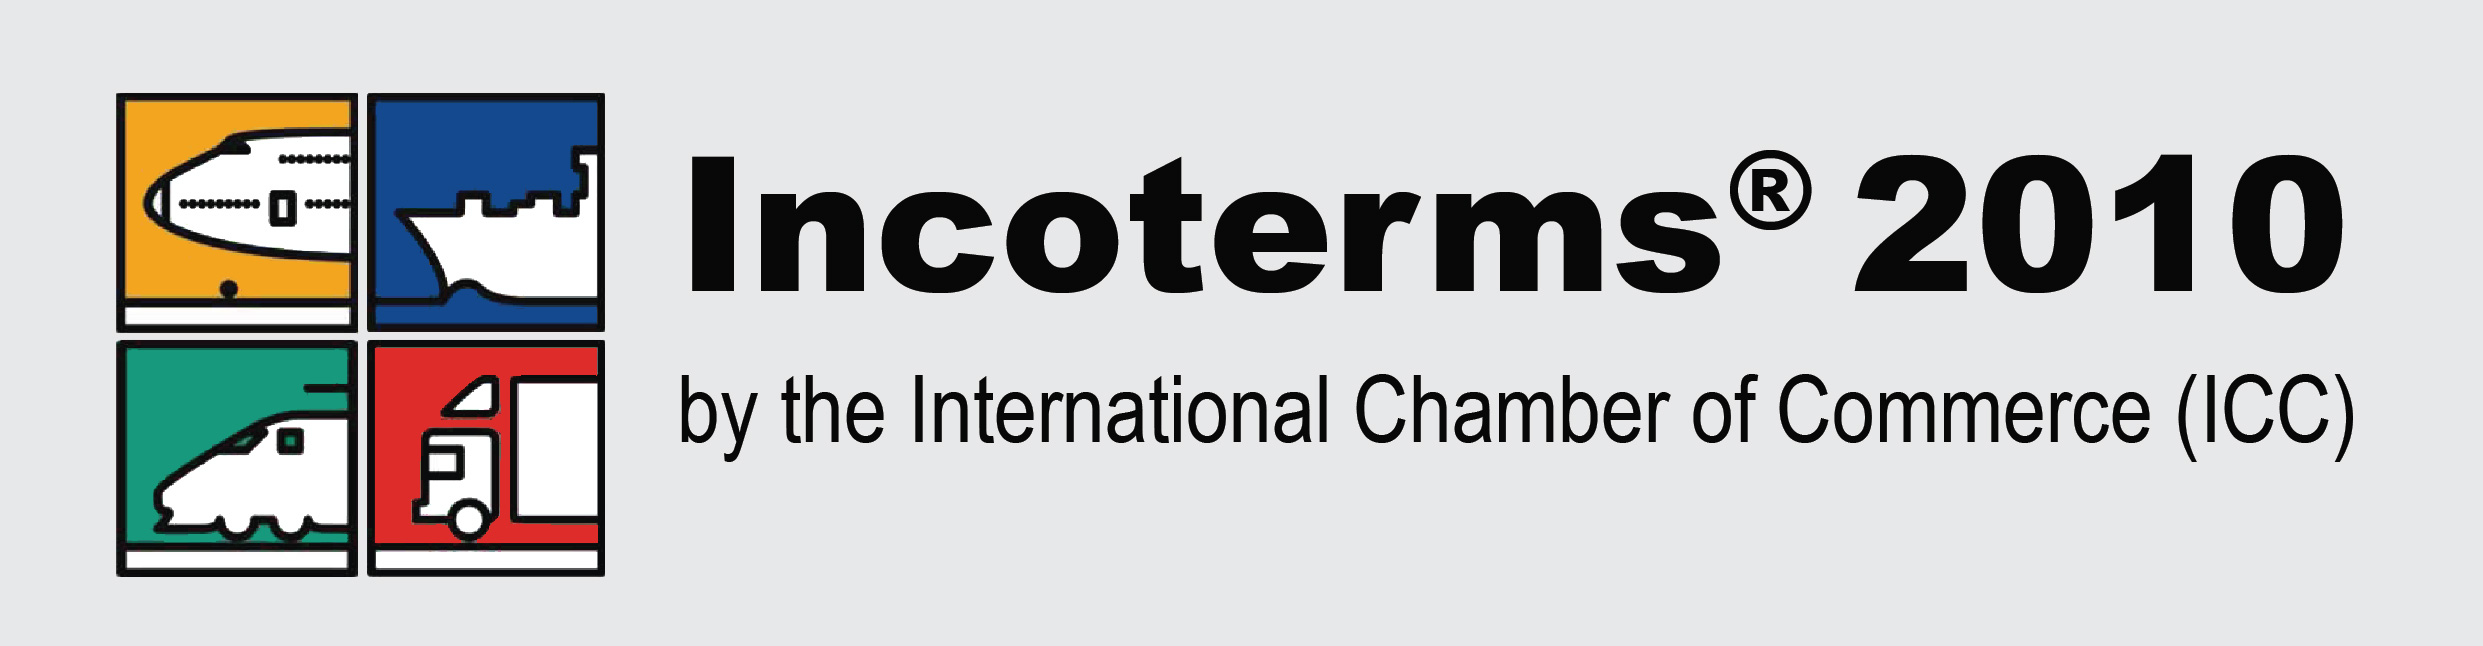 banner incoterms2010 01